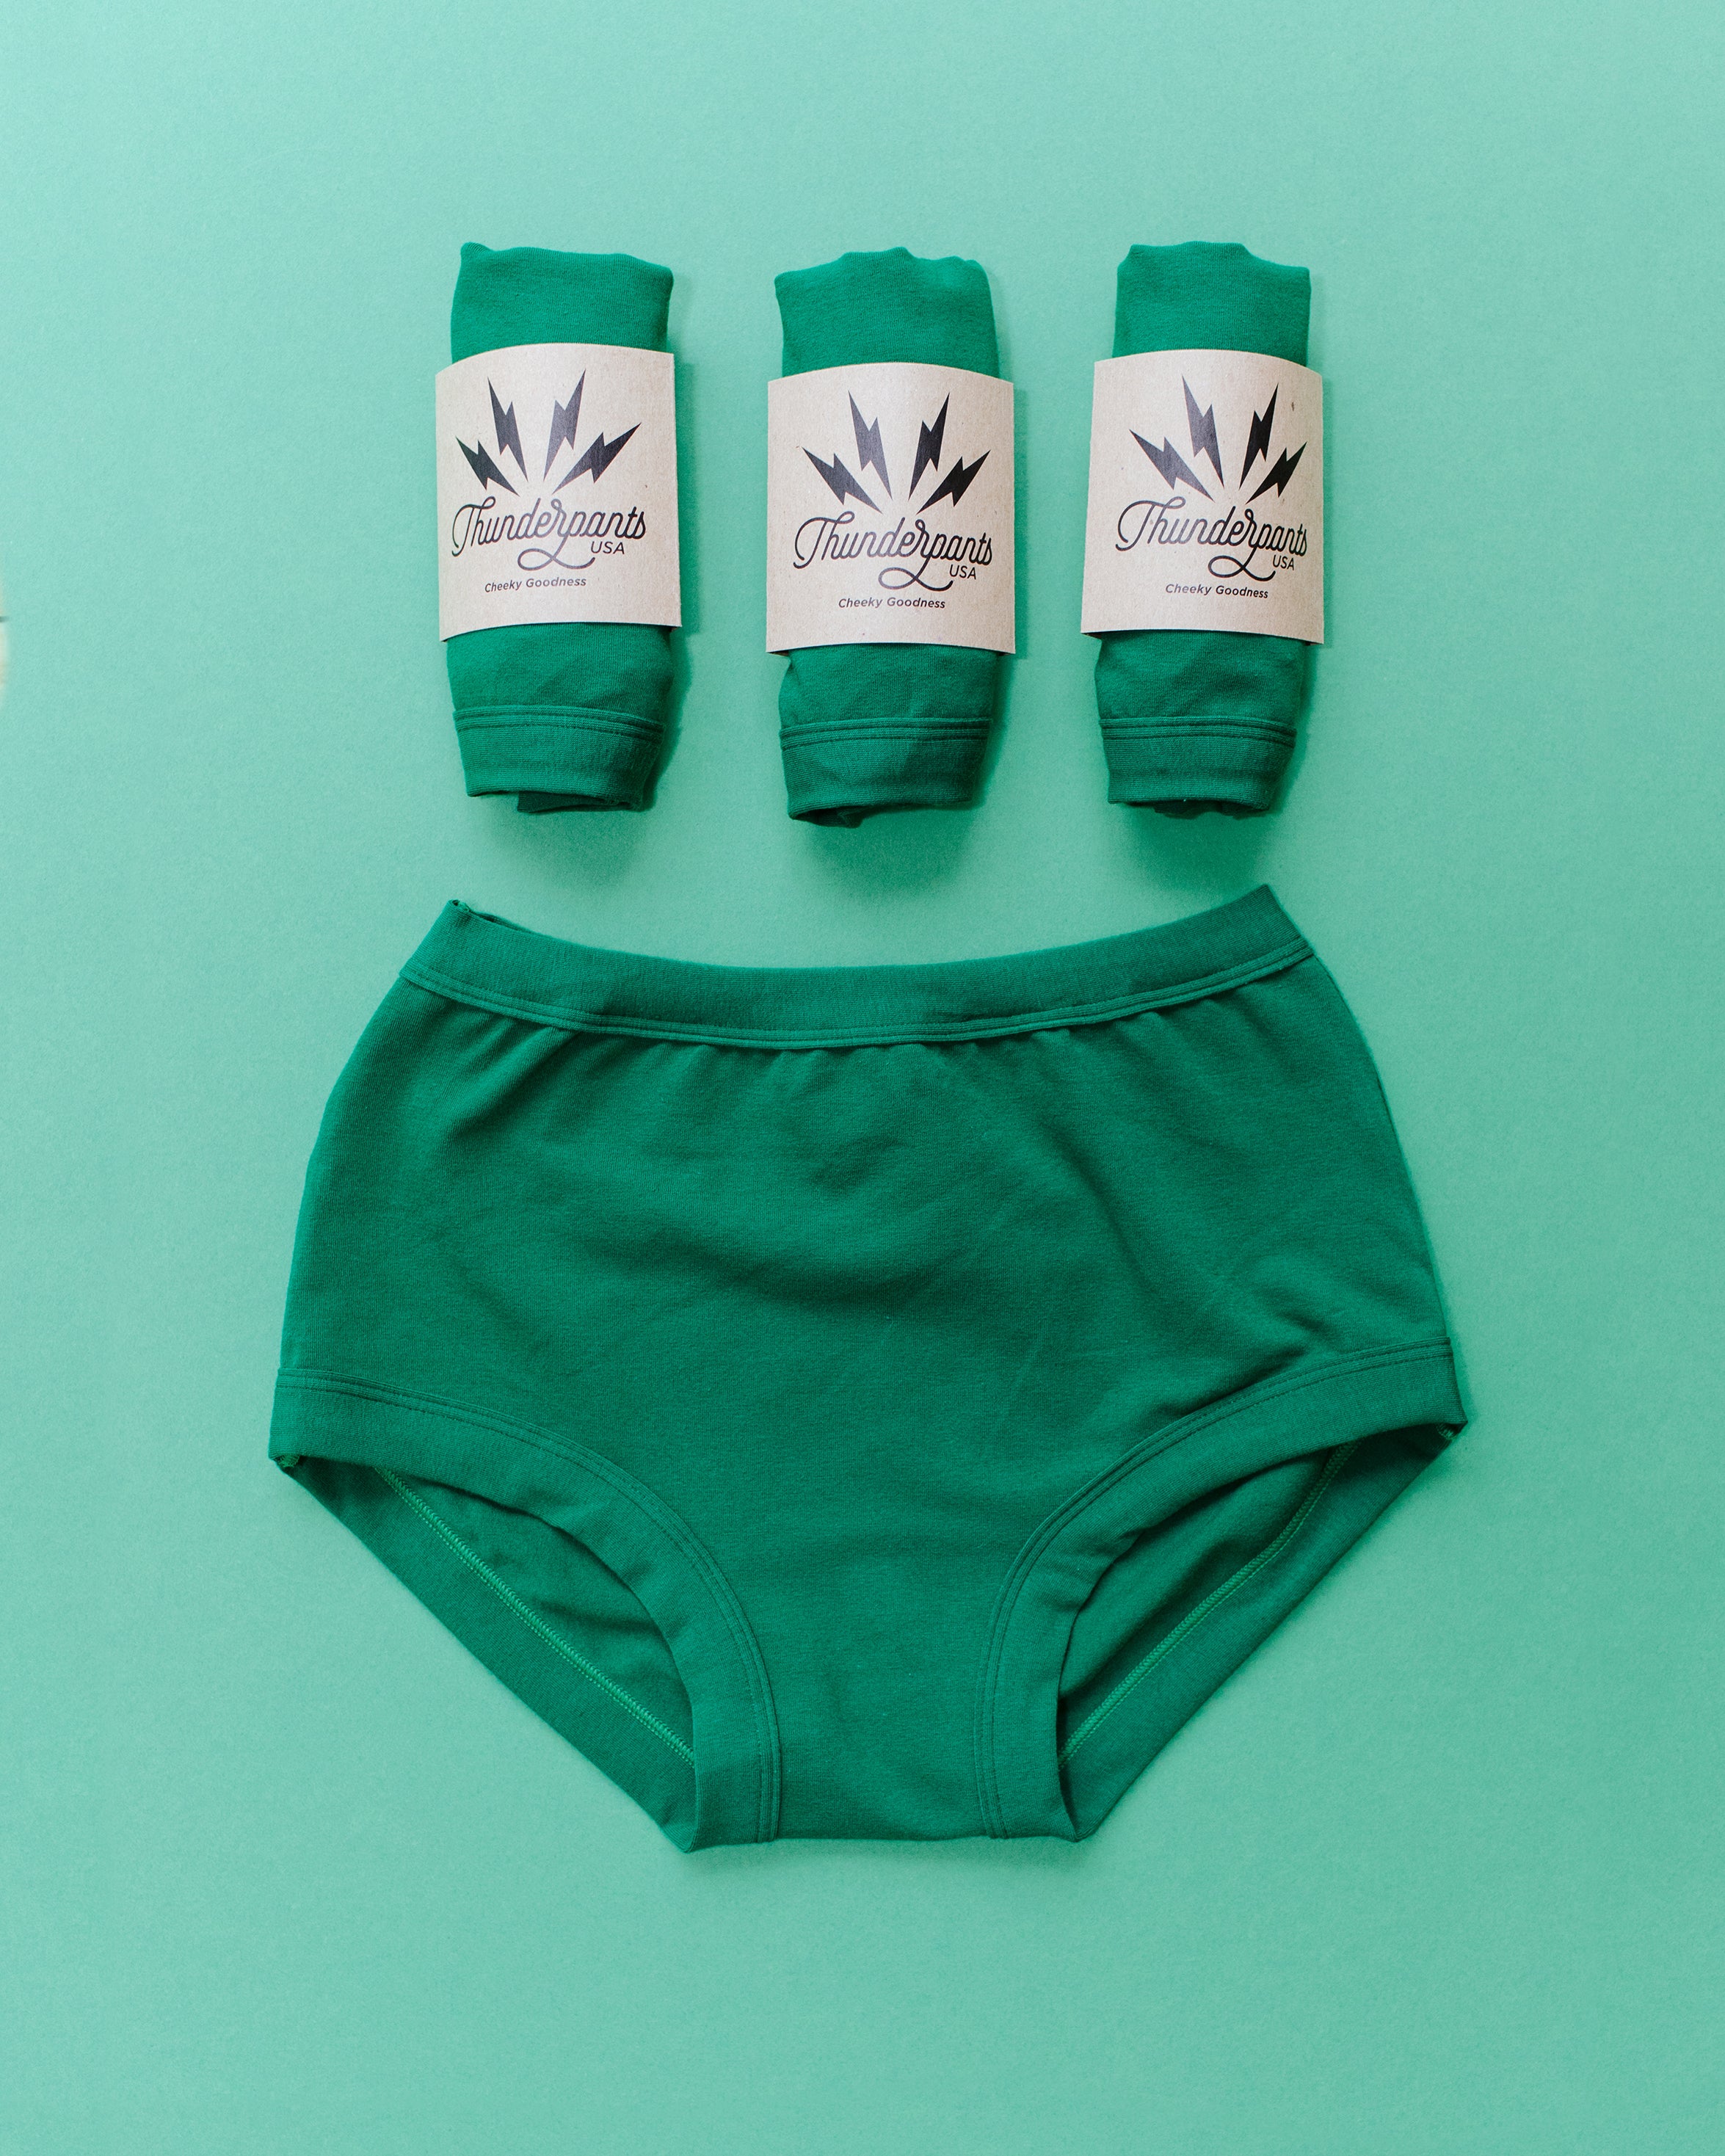 Flat lay of Thunderpants Original style underwear and three packaged undies in Emerald Green.